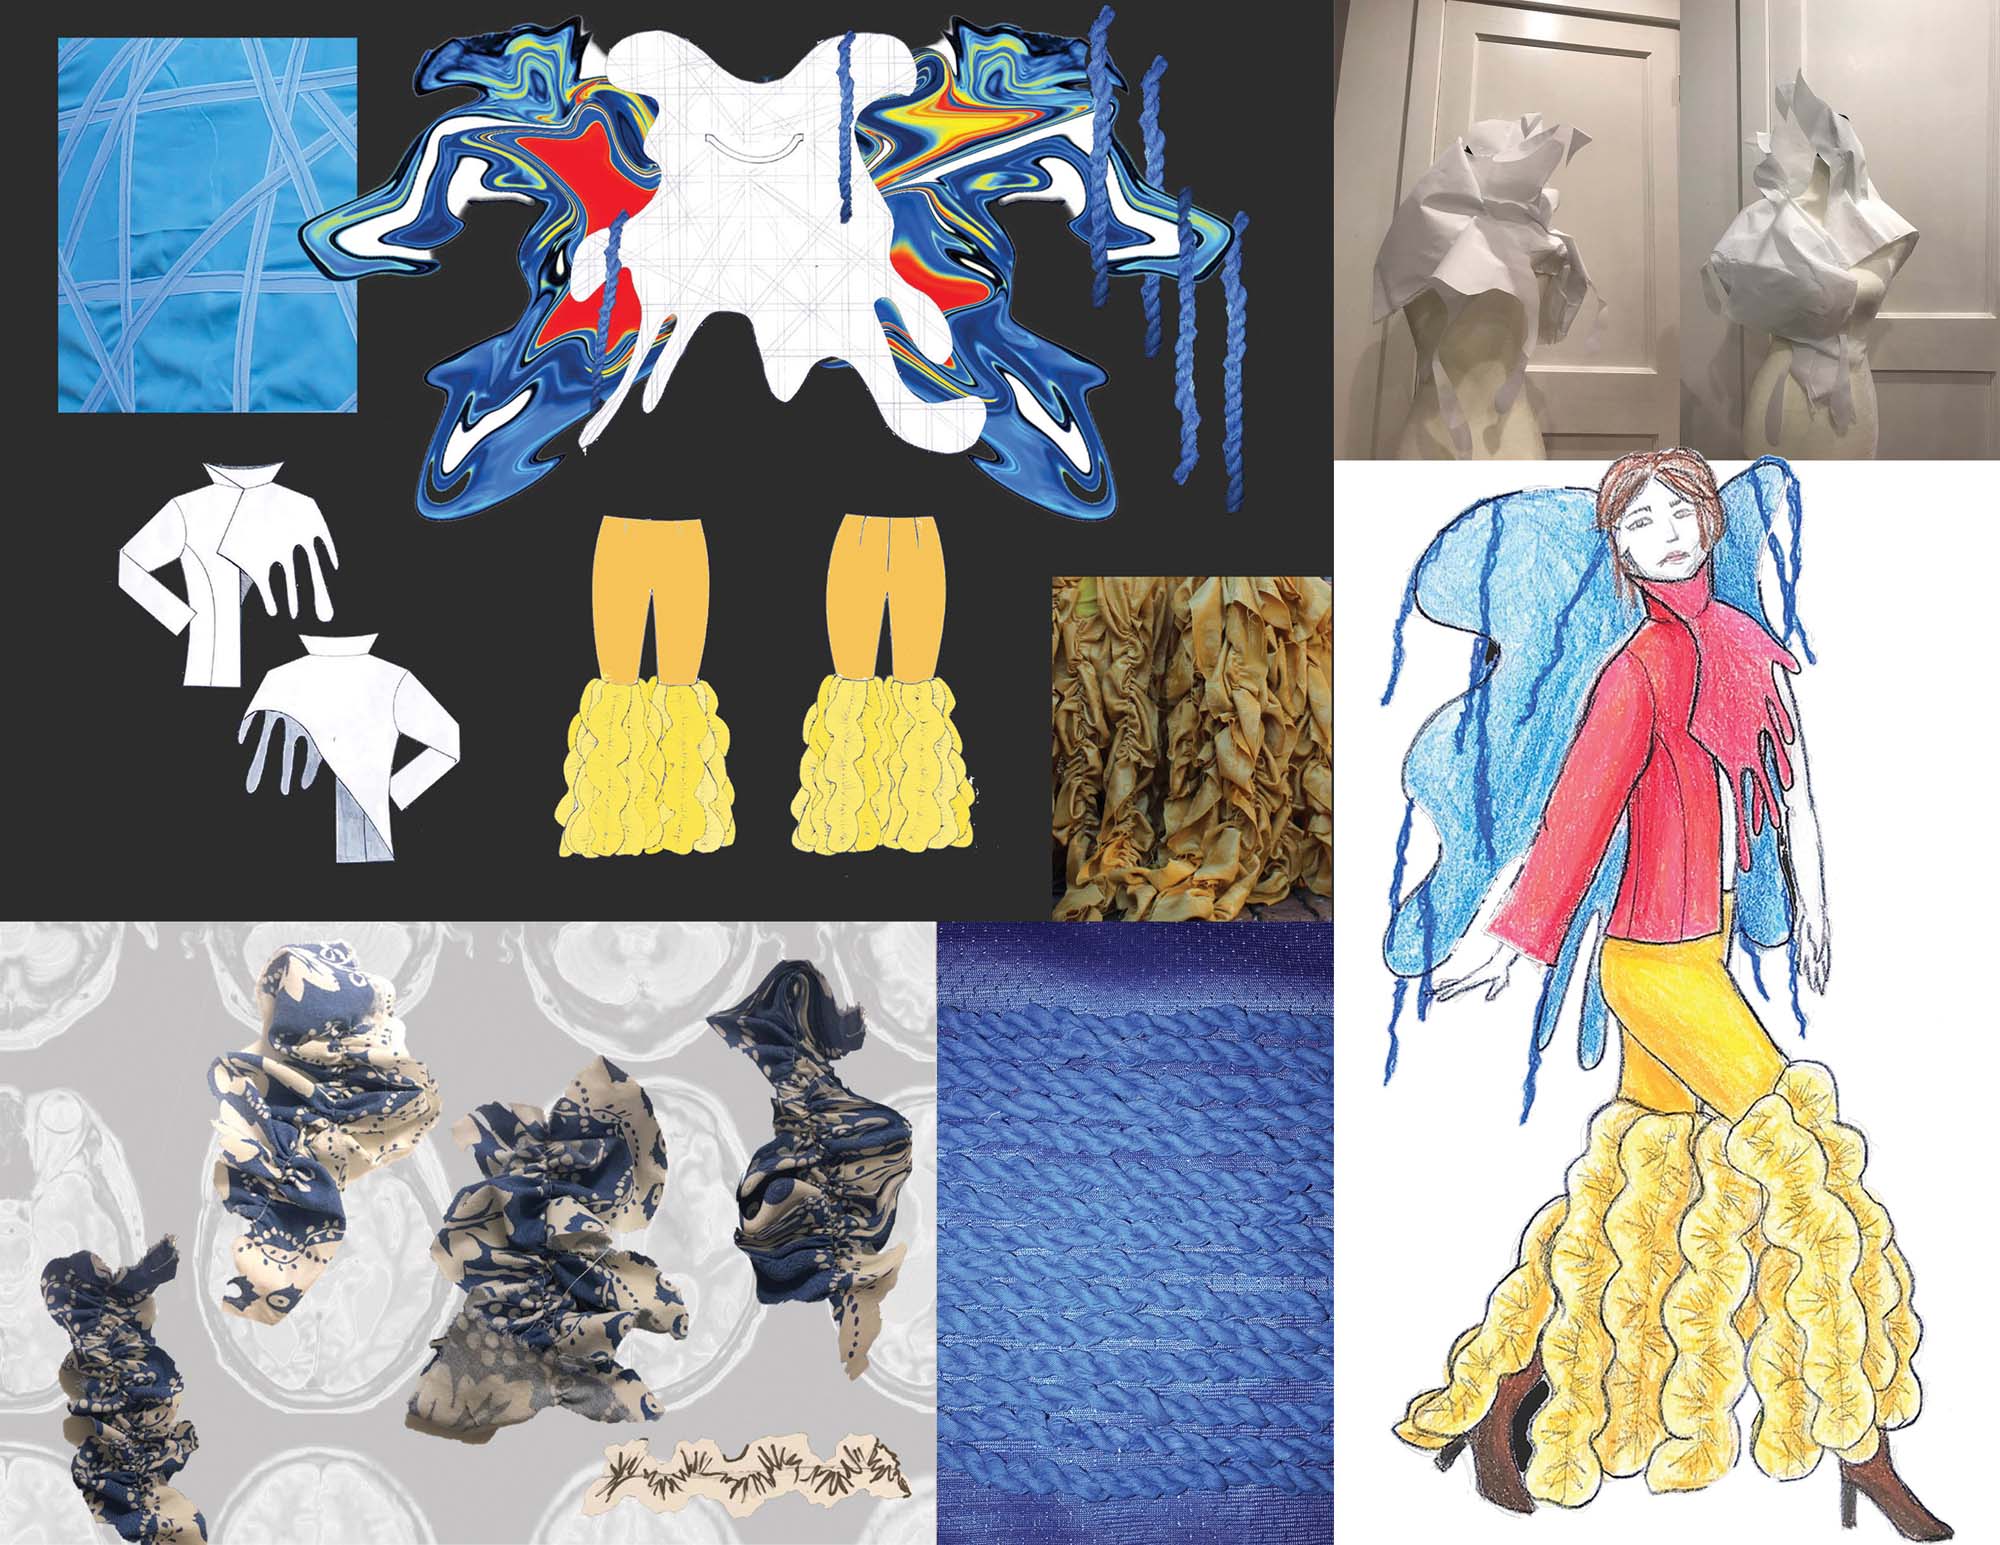 Rose Bizub-Rodriguez - "Sustainability collection", Look 1 sketches and material development